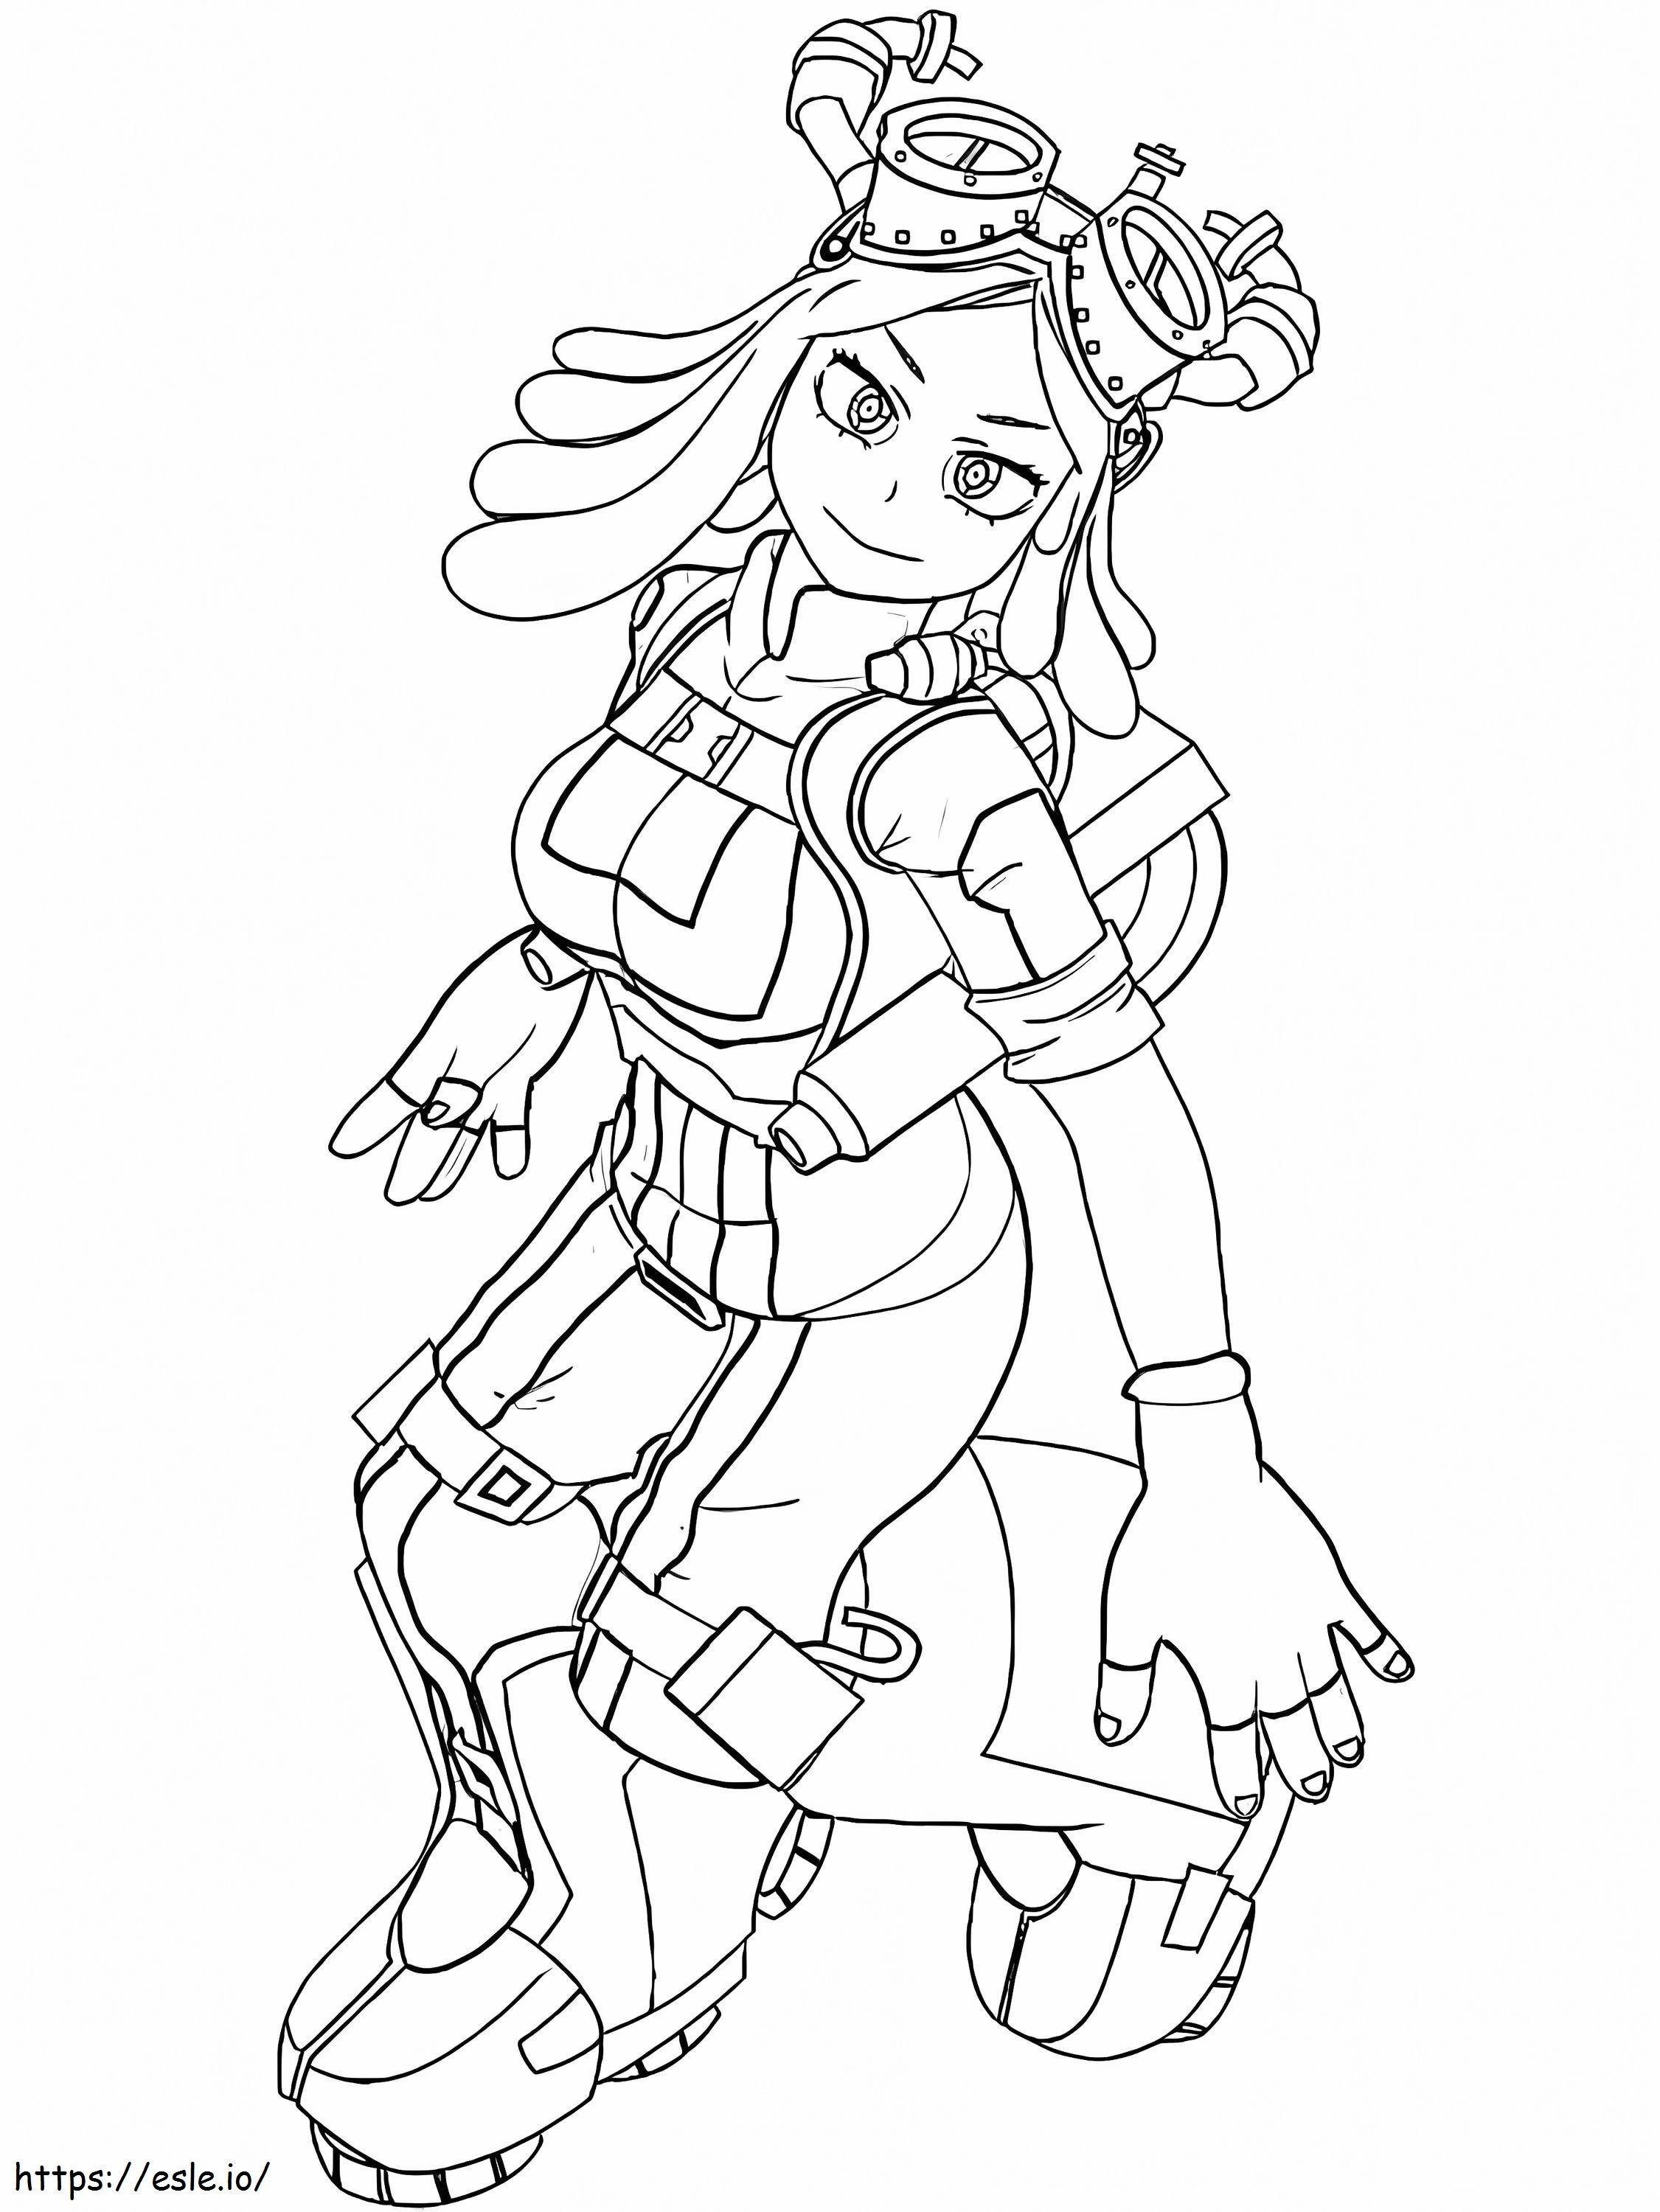 Cute Mei Hatsume coloring page